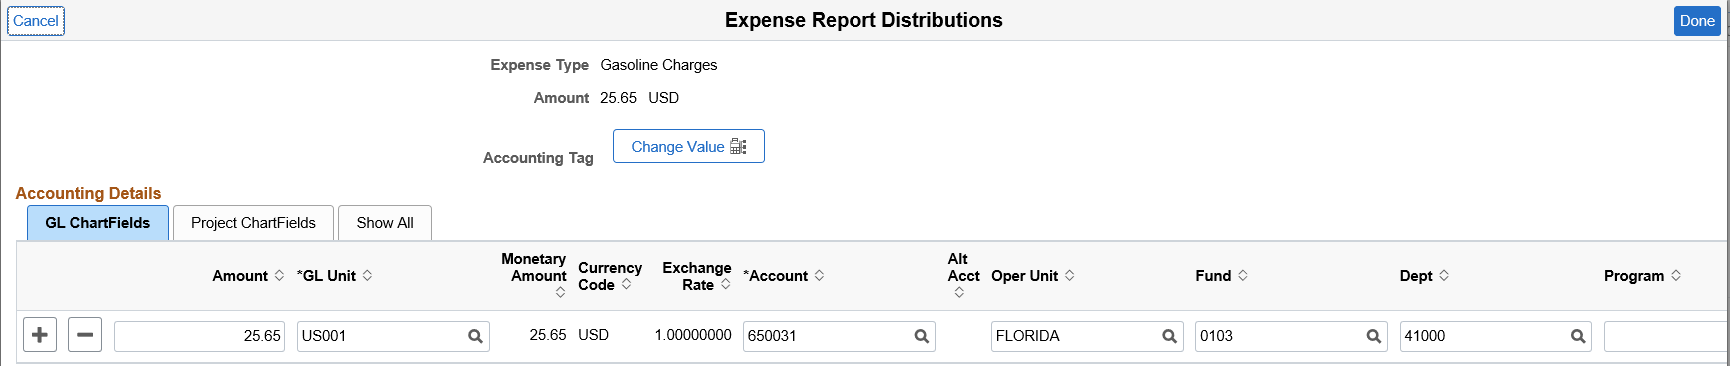 Expense Report Distributions